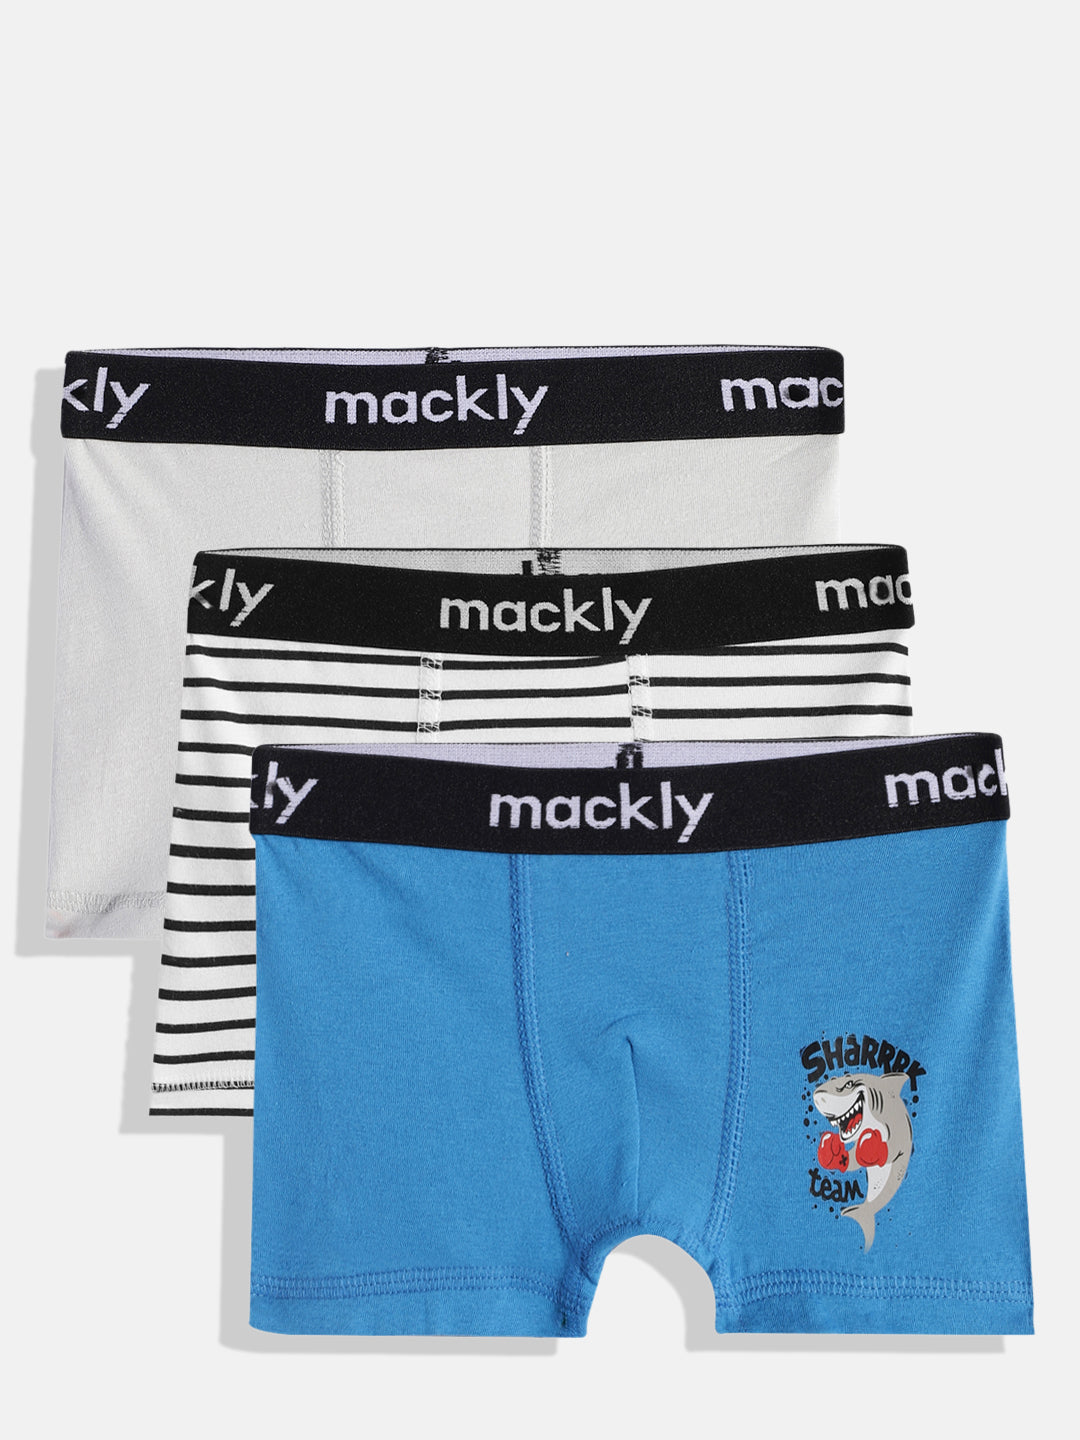 Boys Boxer - Pack of 3